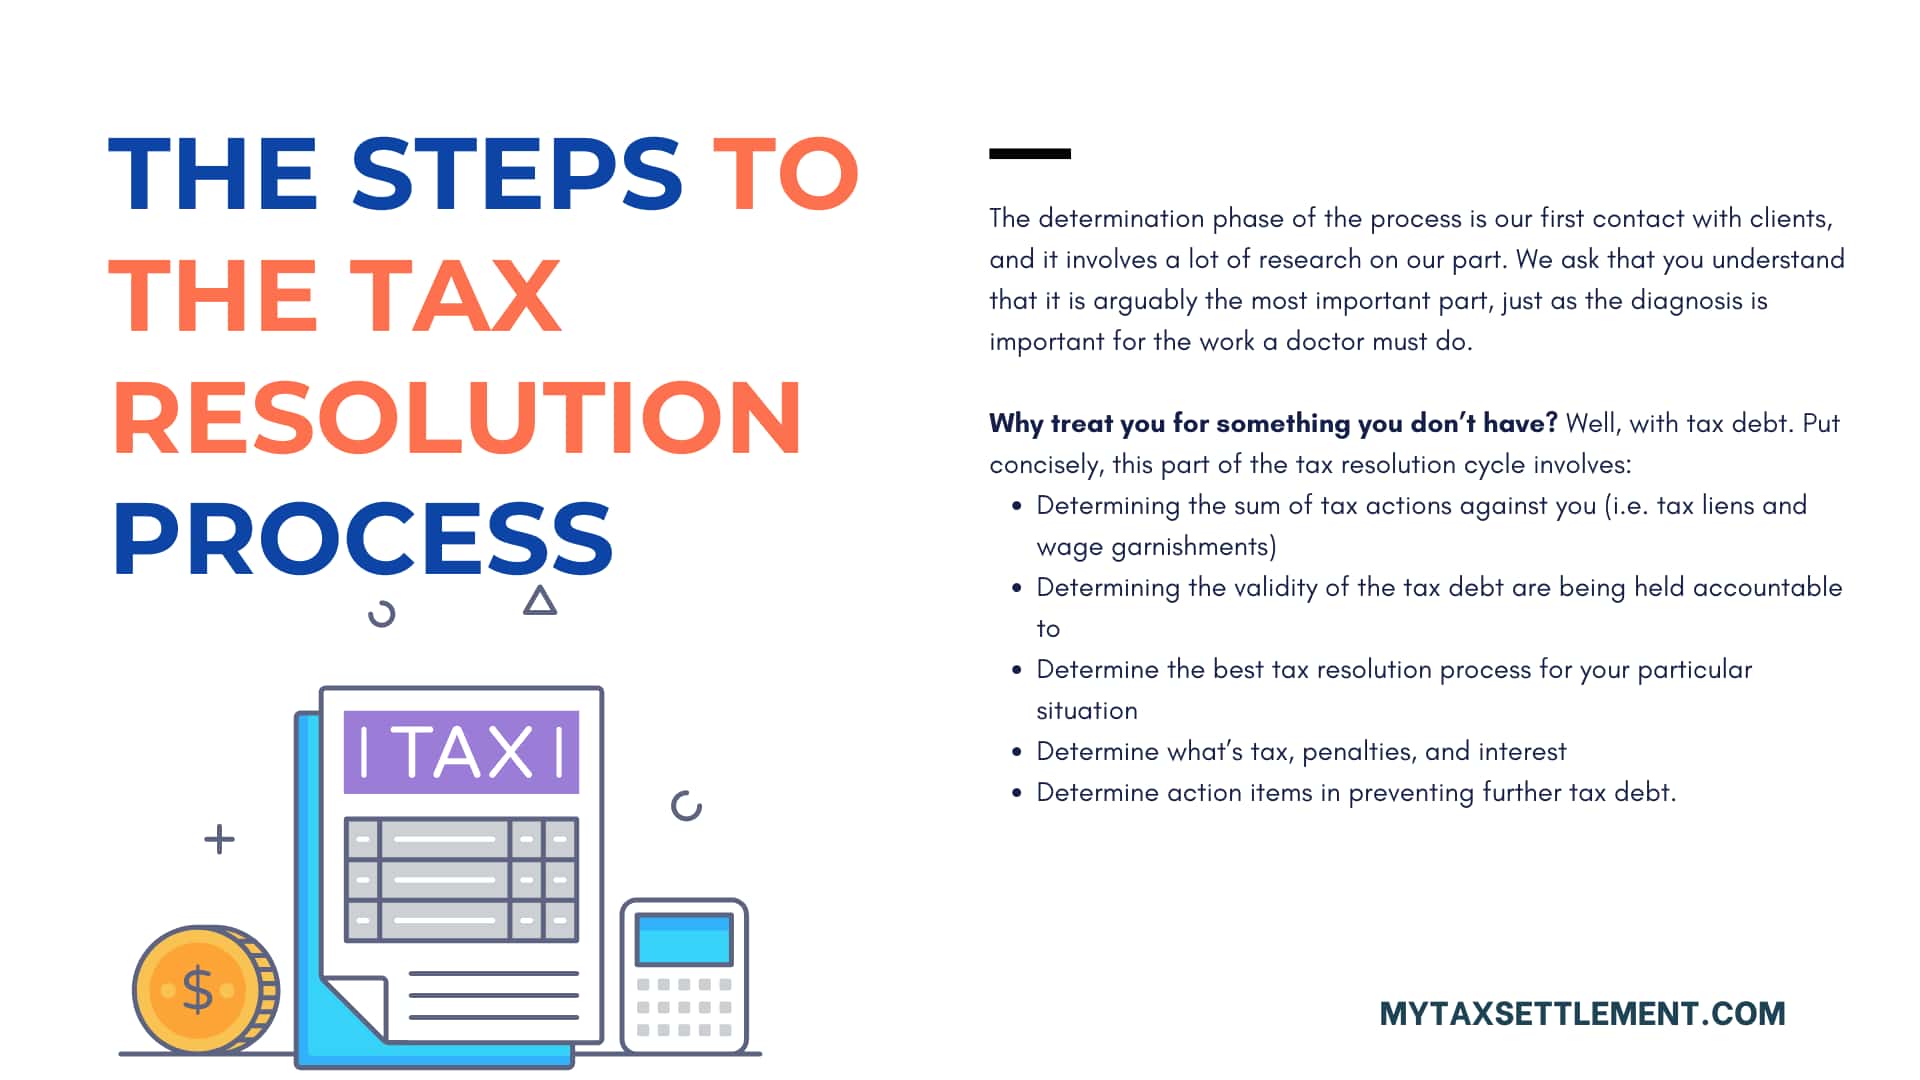 The Steps to the Tax Resolution process